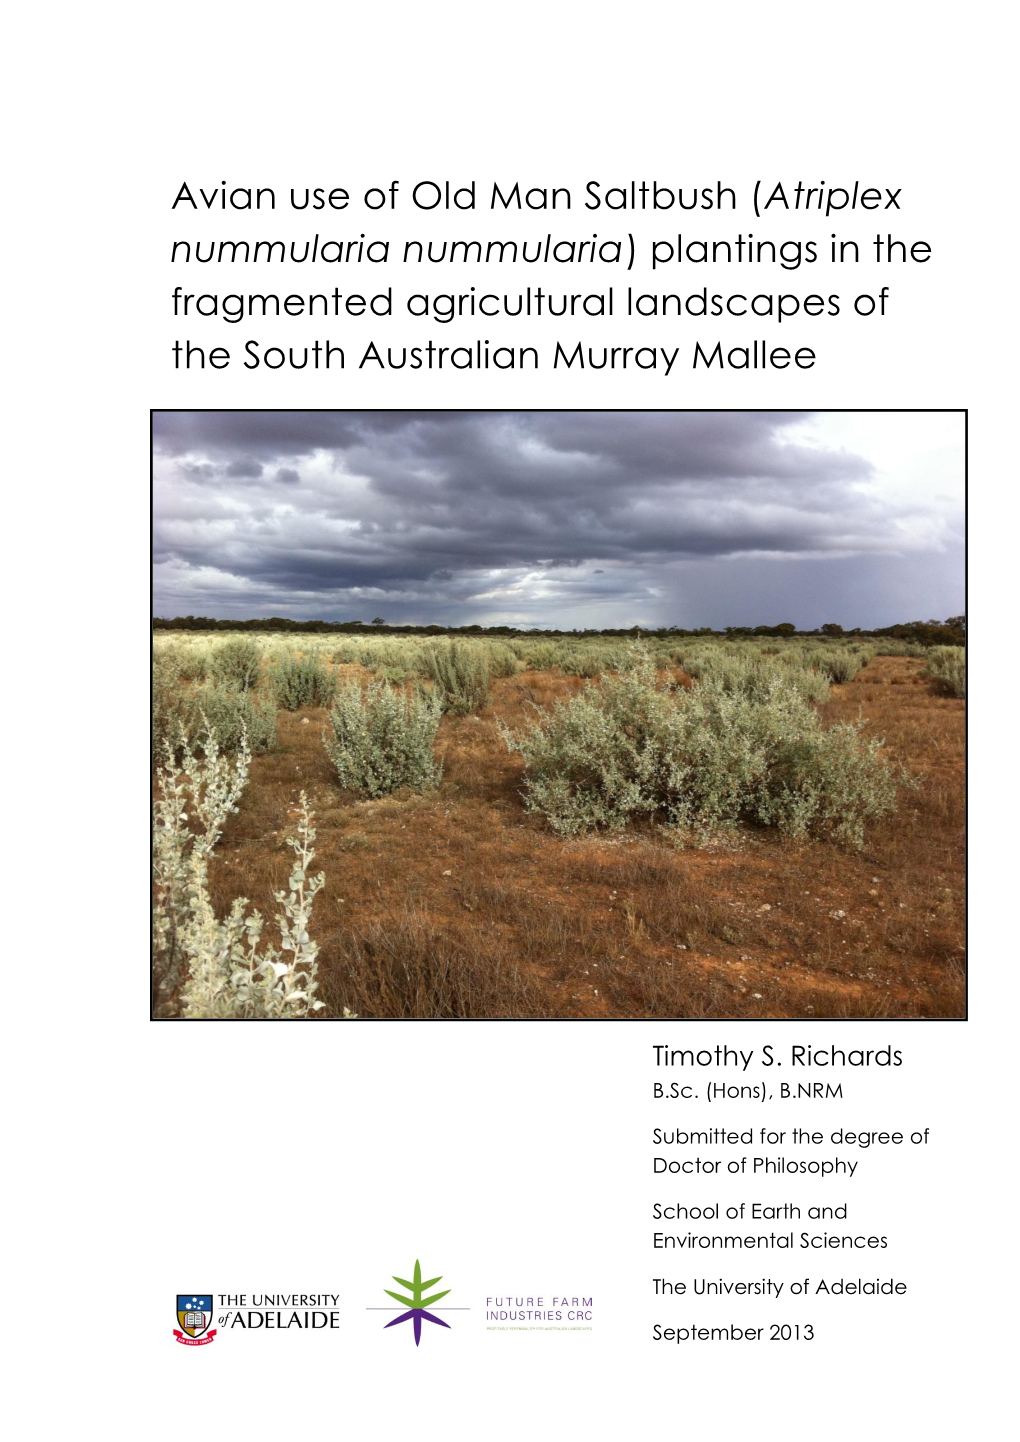 Plantings in the Fragmented Agricultural Landscapes of the South Australian Murray Mallee